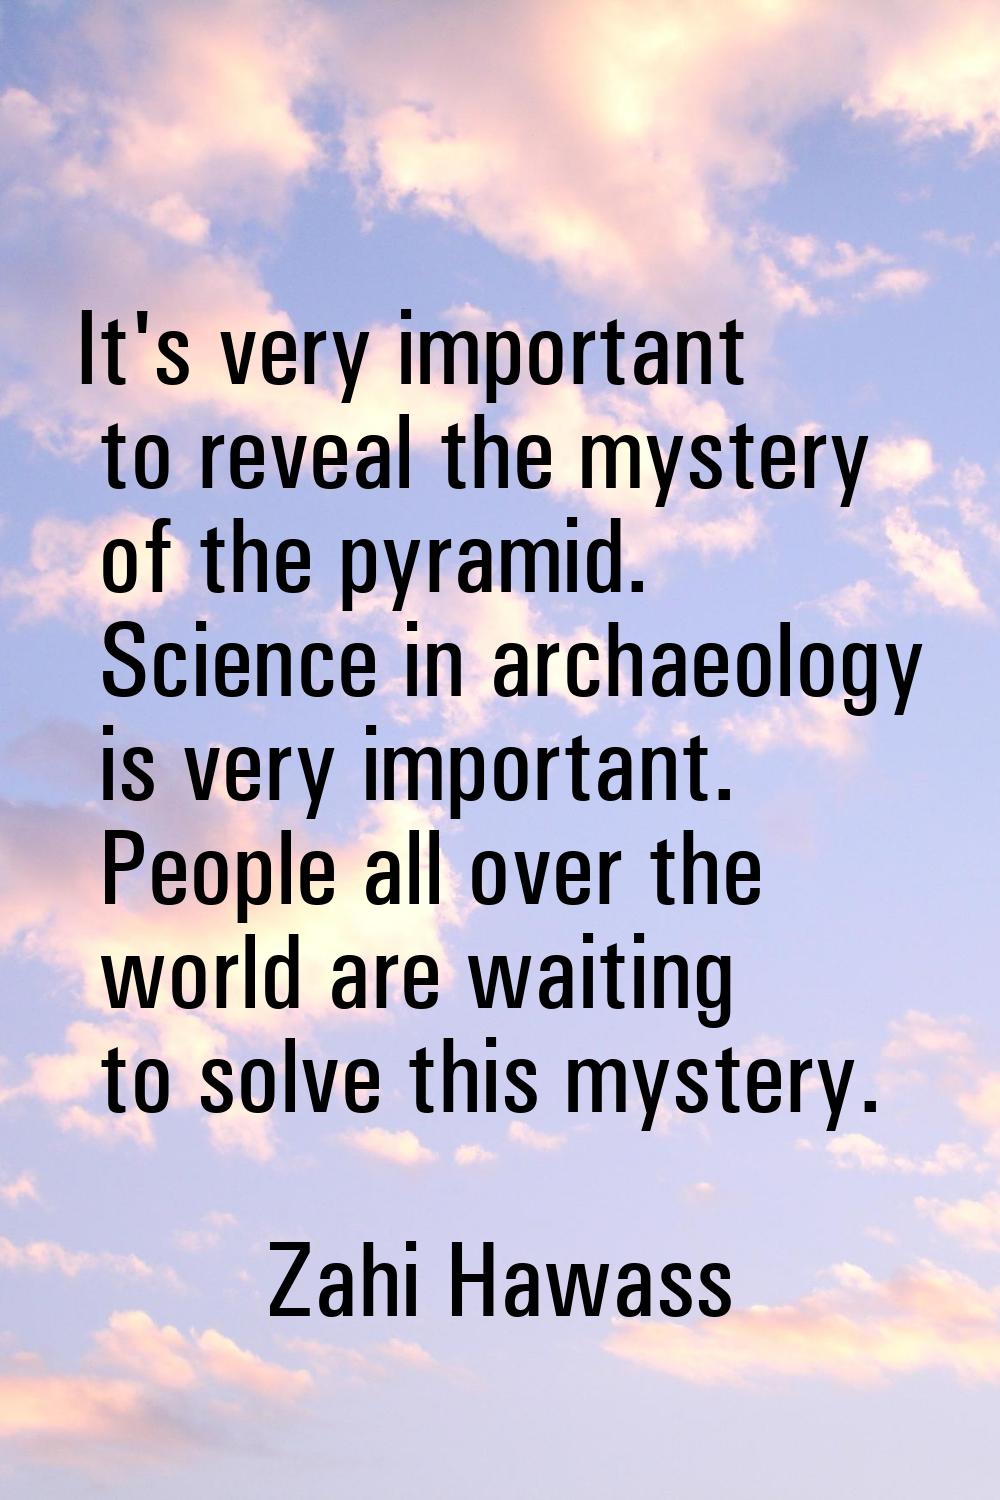 It's very important to reveal the mystery of the pyramid. Science in archaeology is very important.